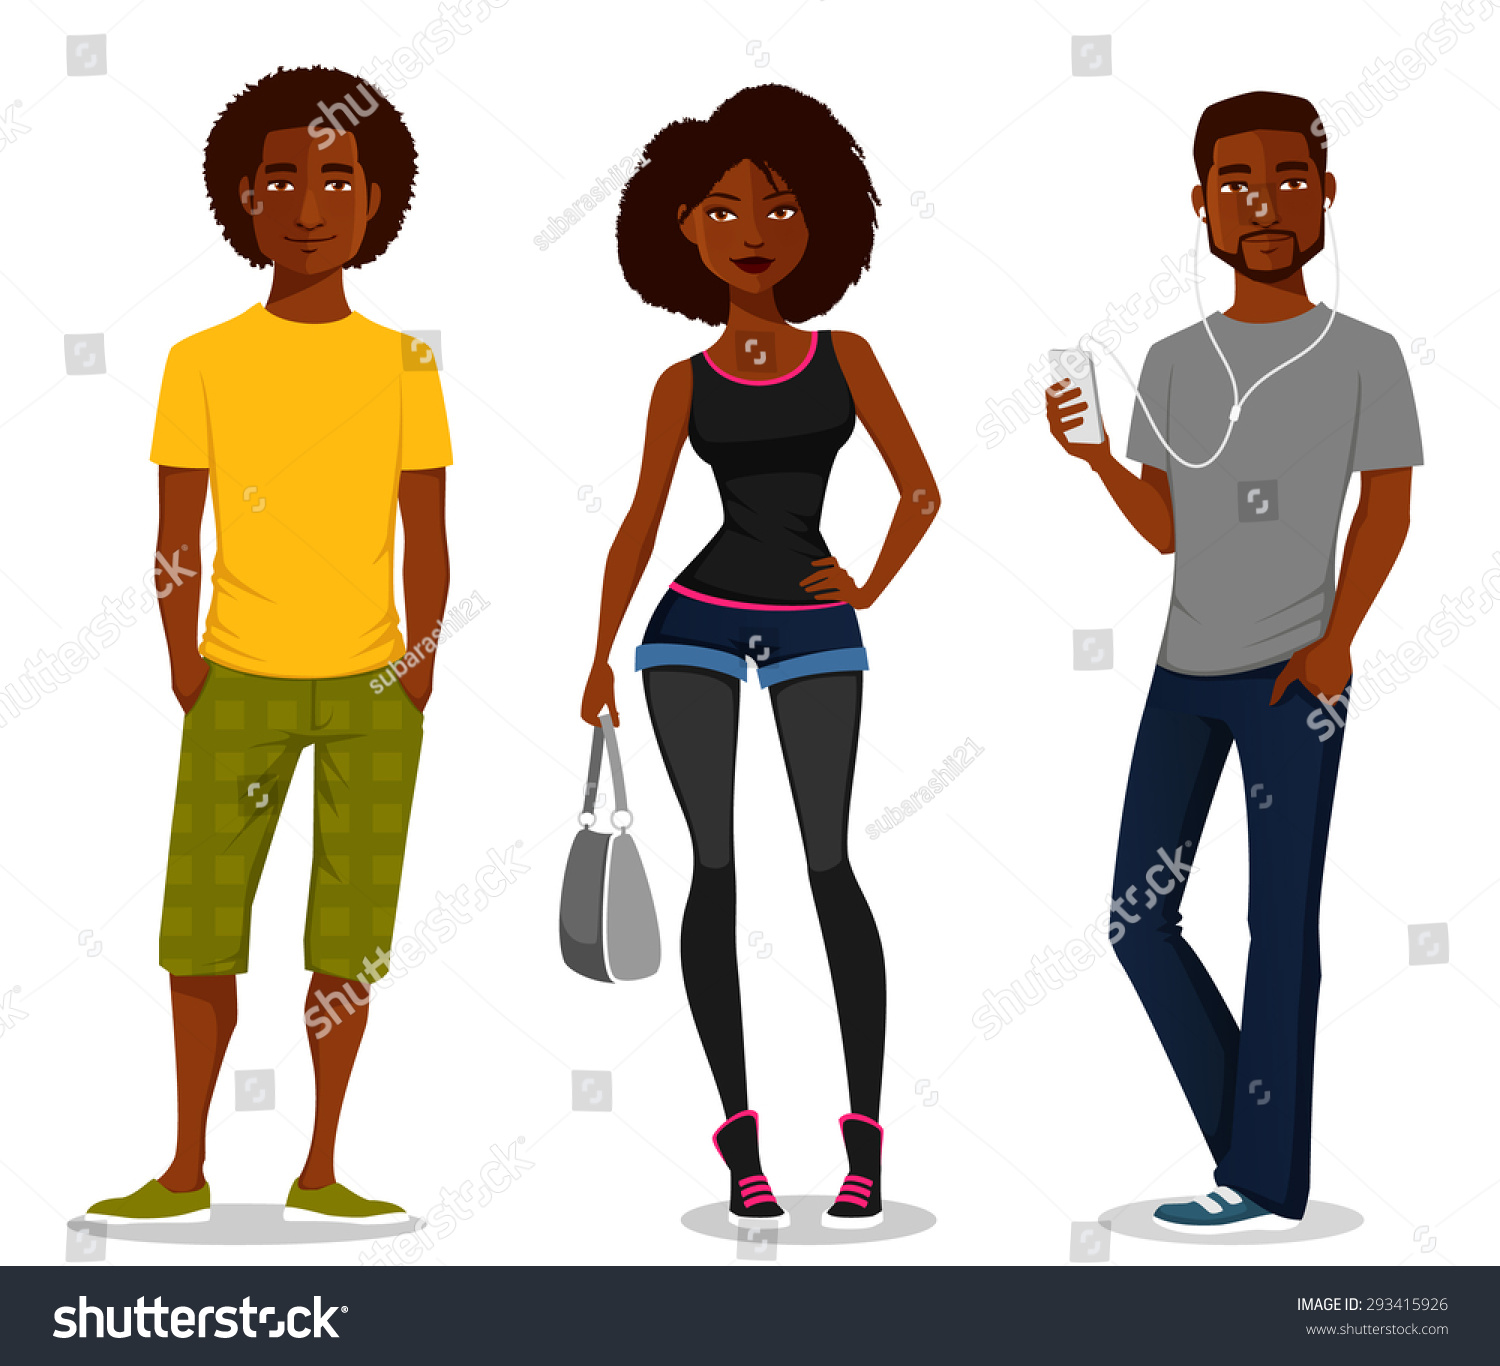 SVG of cartoon illustration of young African American people. Beautiful black woman and handsome guys in casual street fashion. svg